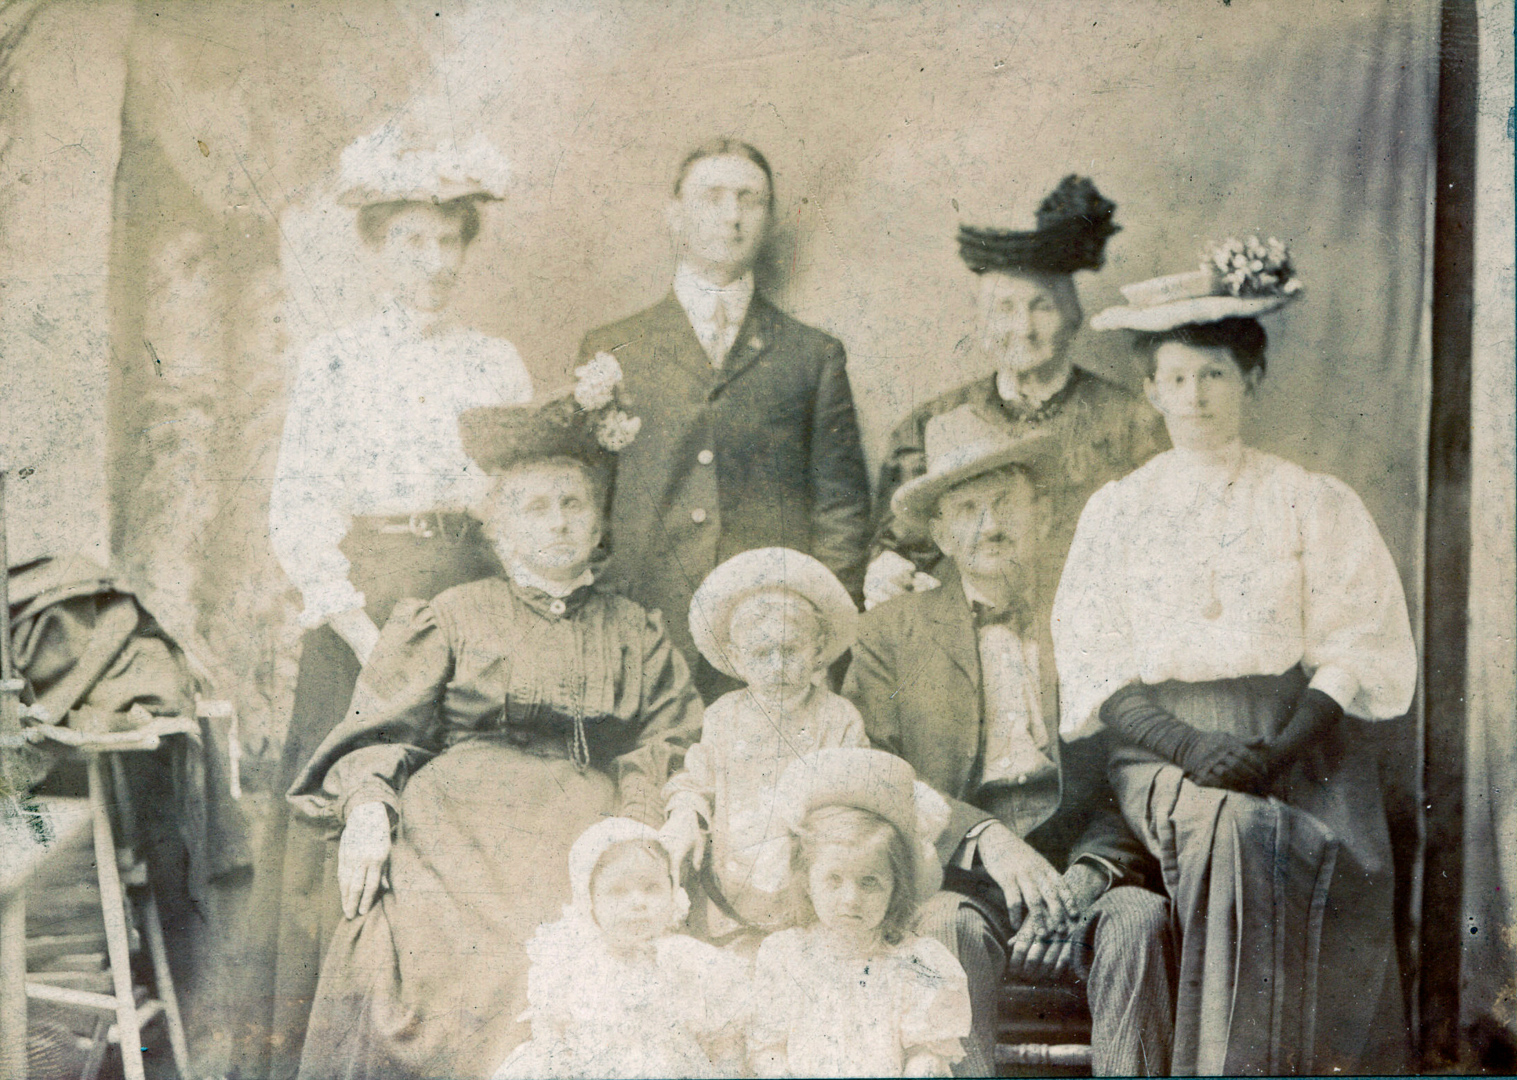 [Toohey Family; back: Sarah Ann, John Patrick (or possibly James Asa), Kate (probable); middle seated: Mary, James, Margaret; children front: Joseph M., William L, Jeremiah Toohey; cira 1896]